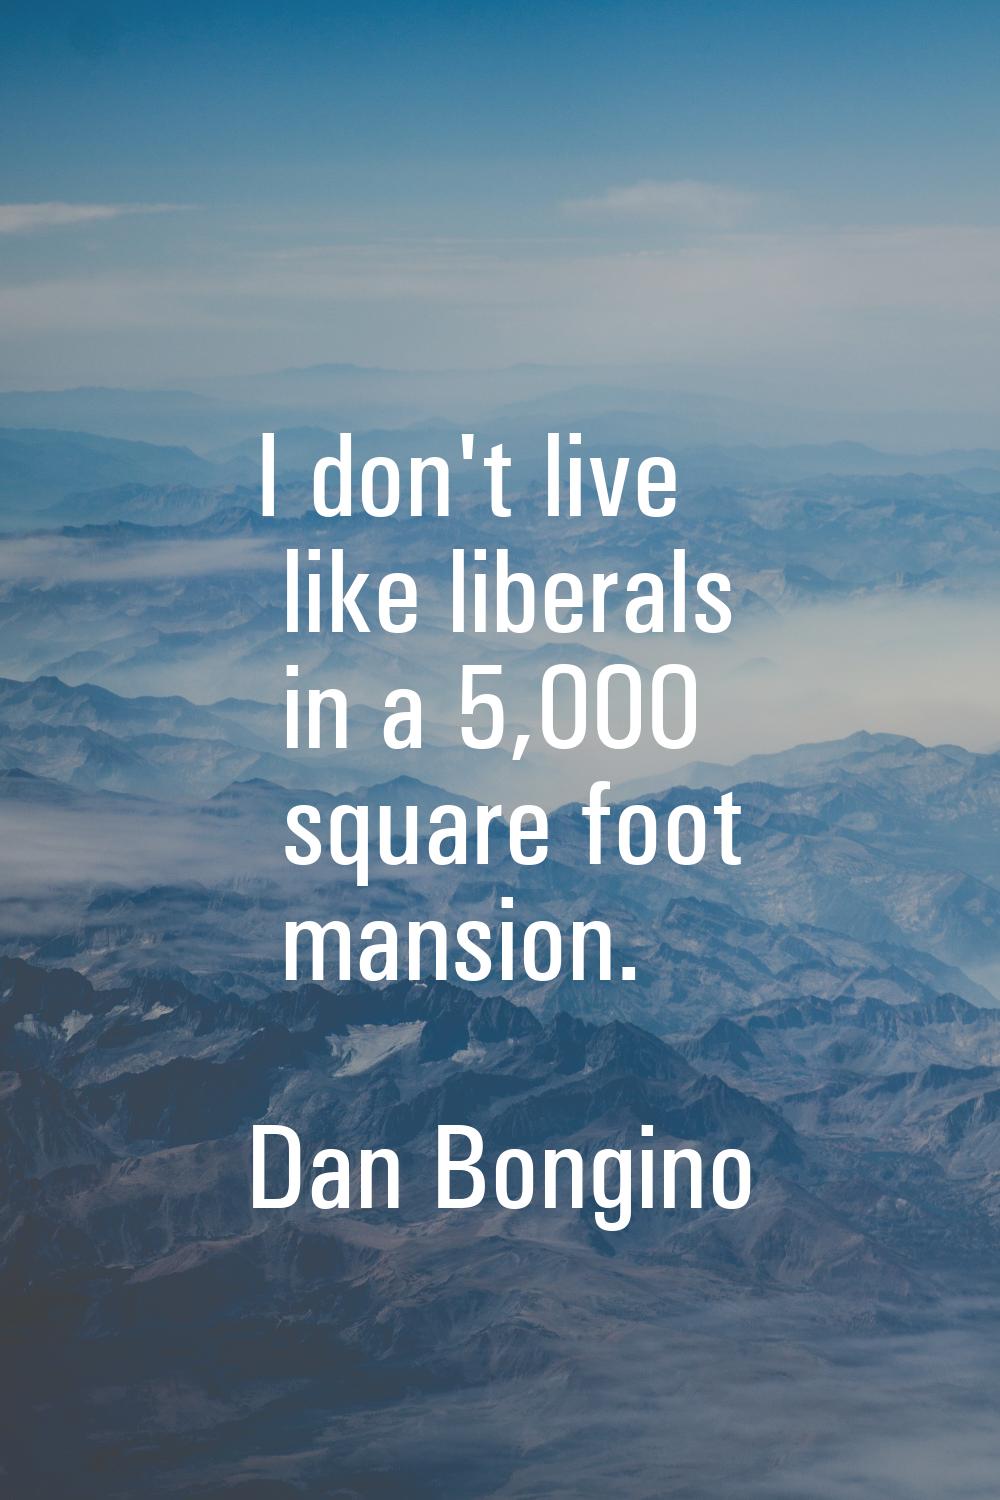 I don't live like liberals in a 5,000 square foot mansion.